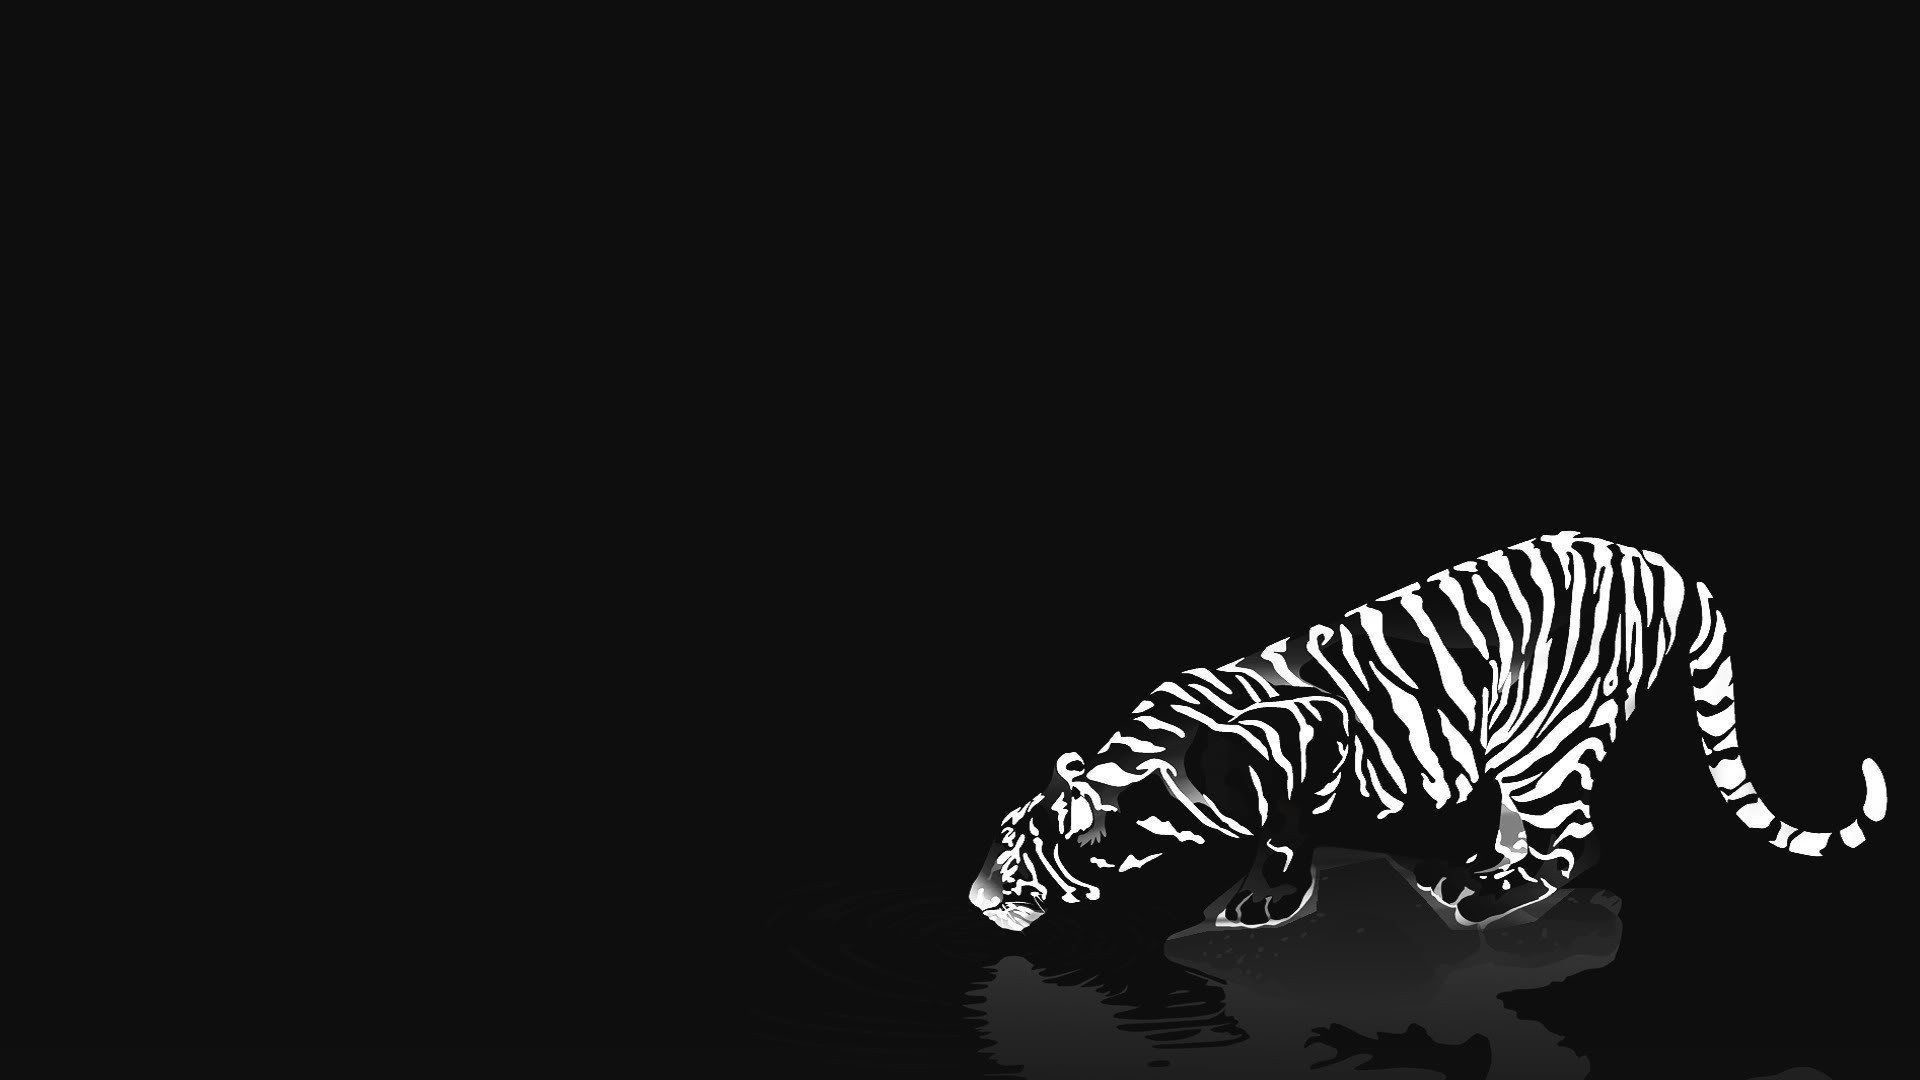 1920x1080 Cats animals tigers white tiger reflections black background .